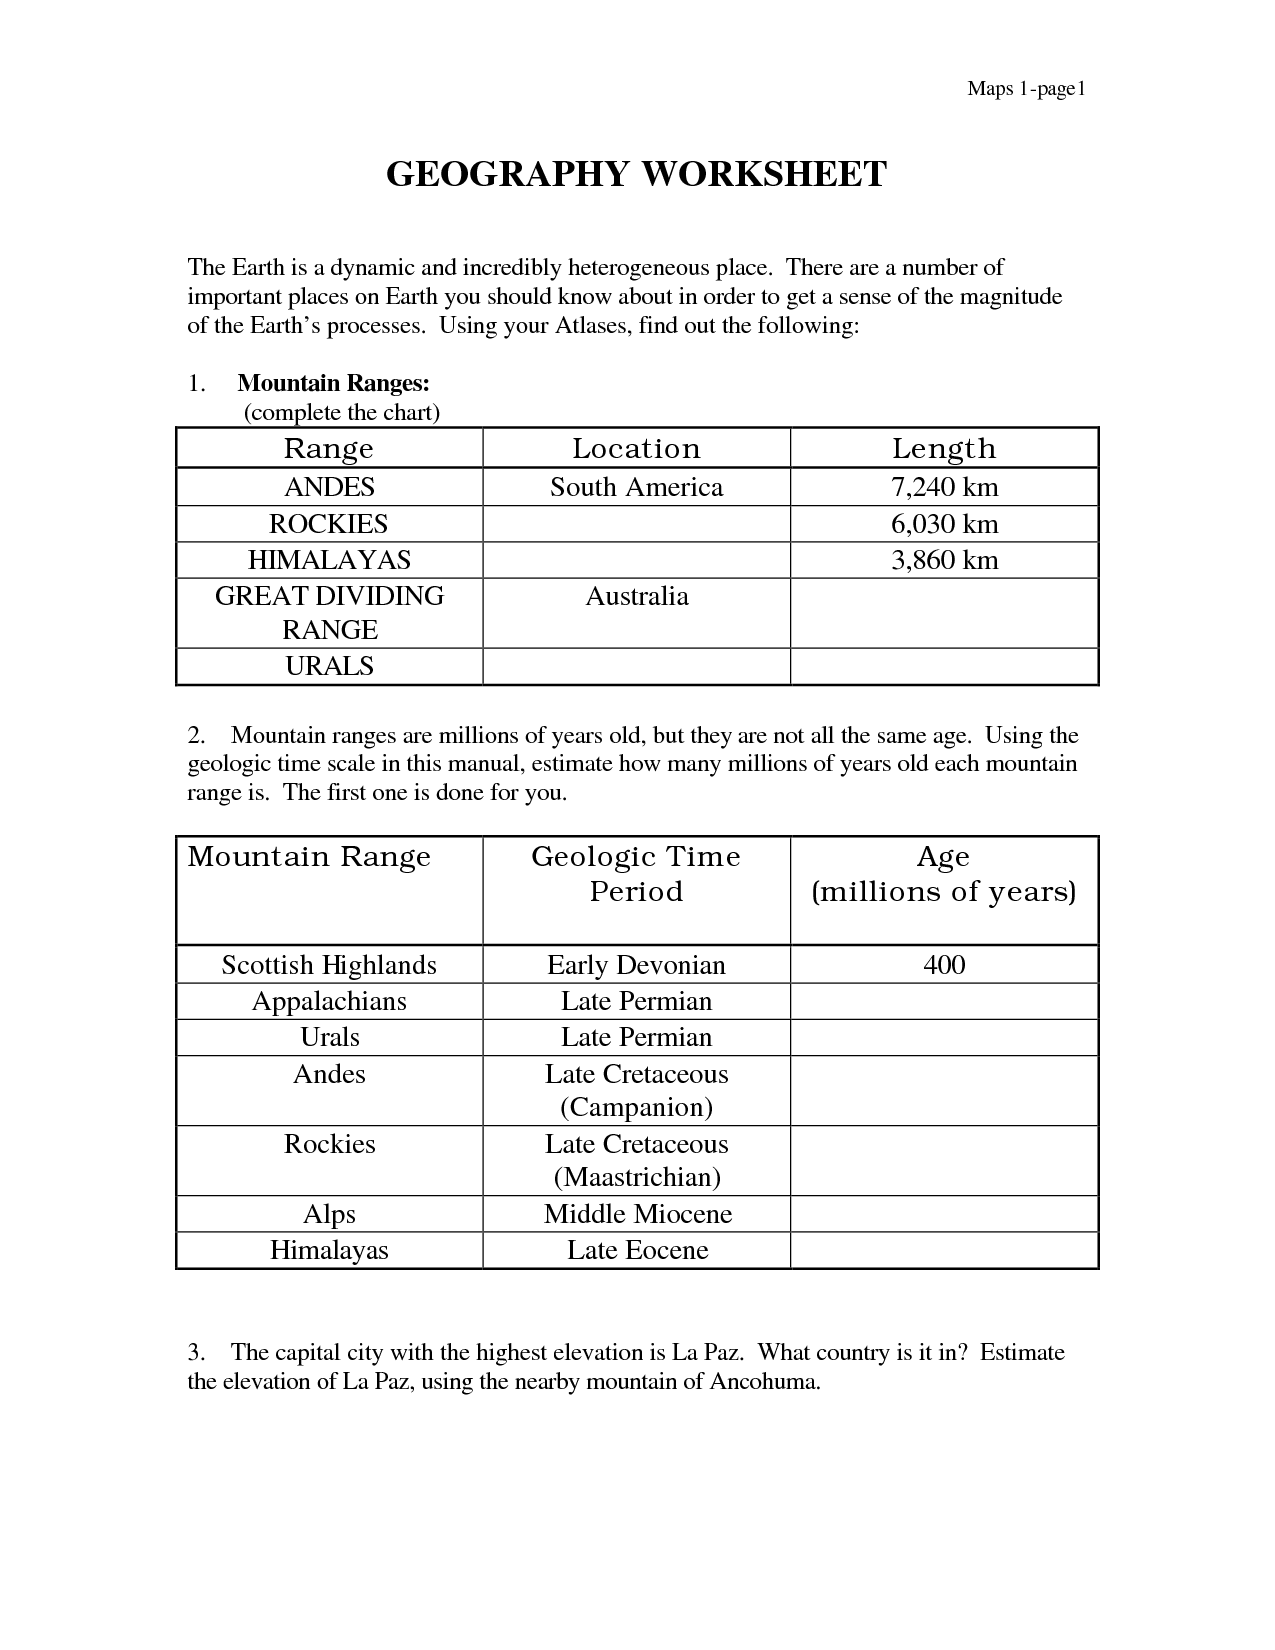 Geography Worksheets Image